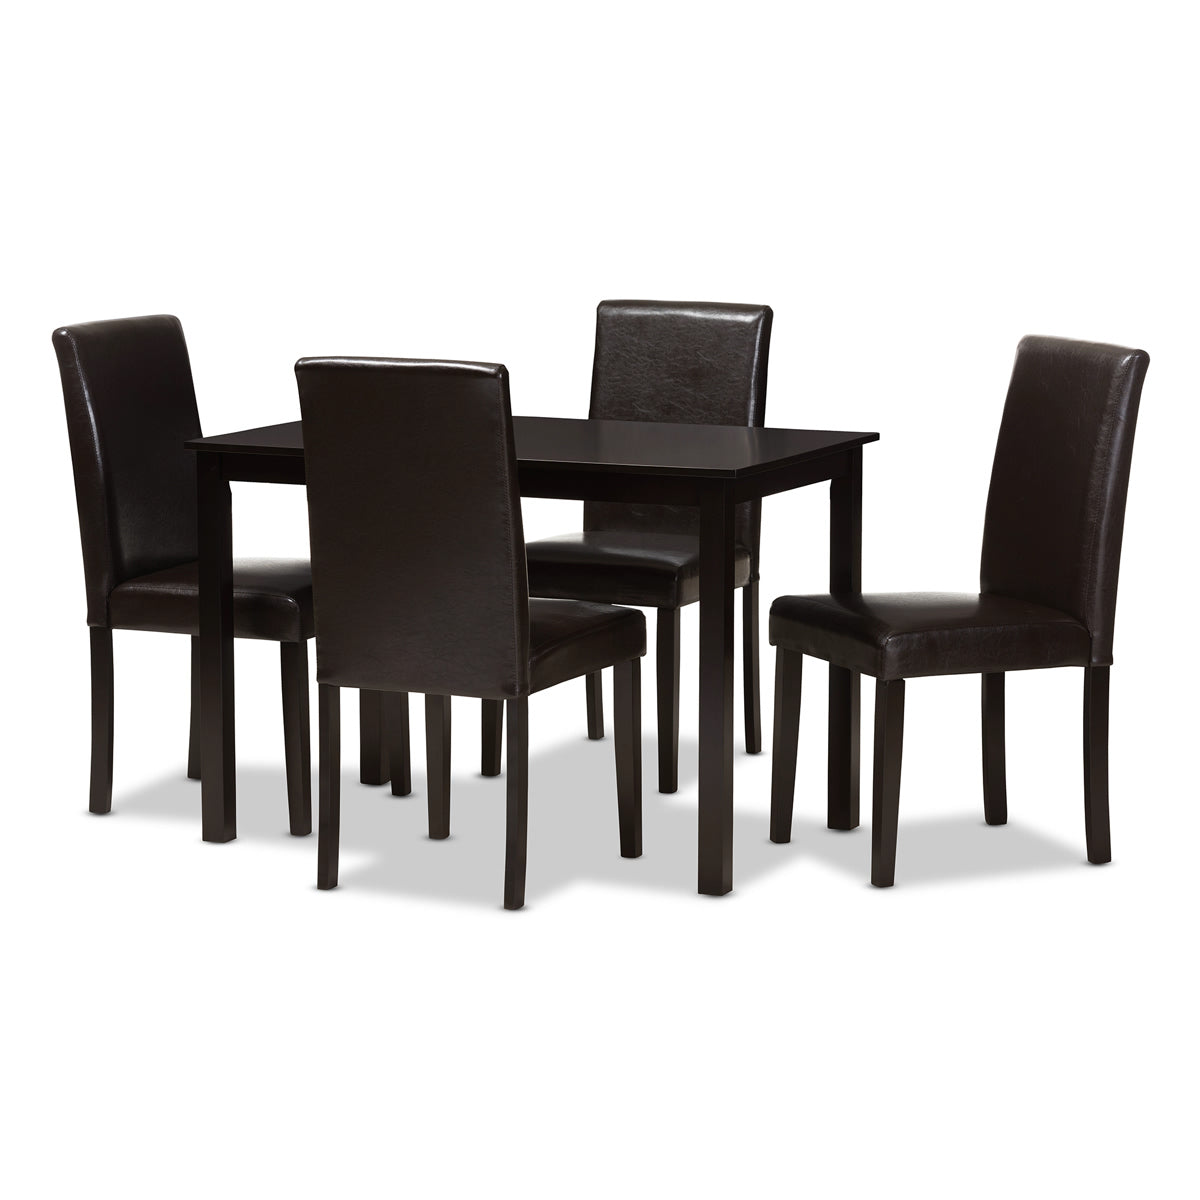 Baxton Studio Mia Modern and Contemporary Dark Brown Faux Leather Upholstered 5-Piece Dining Set Baxton Studio-0-Minimal And Modern - 1